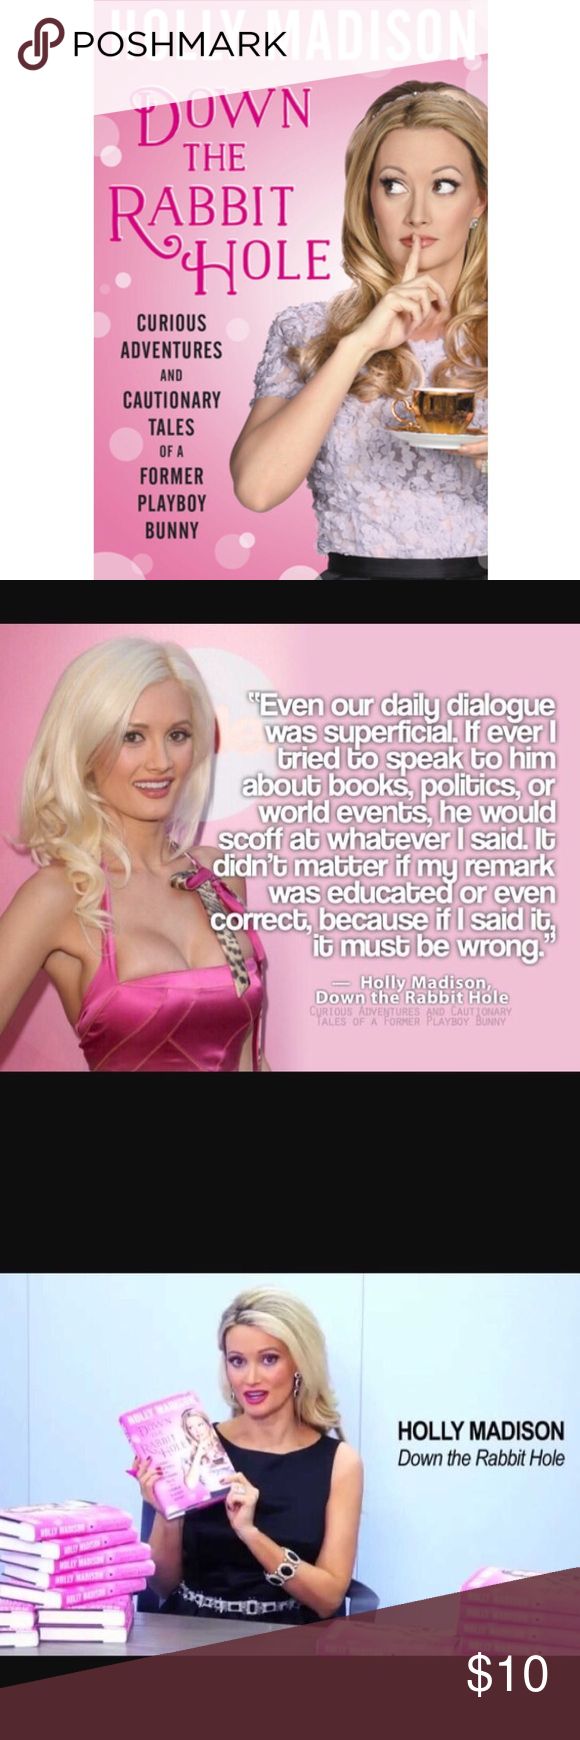 holly madison down the rabbit hole free ebook download